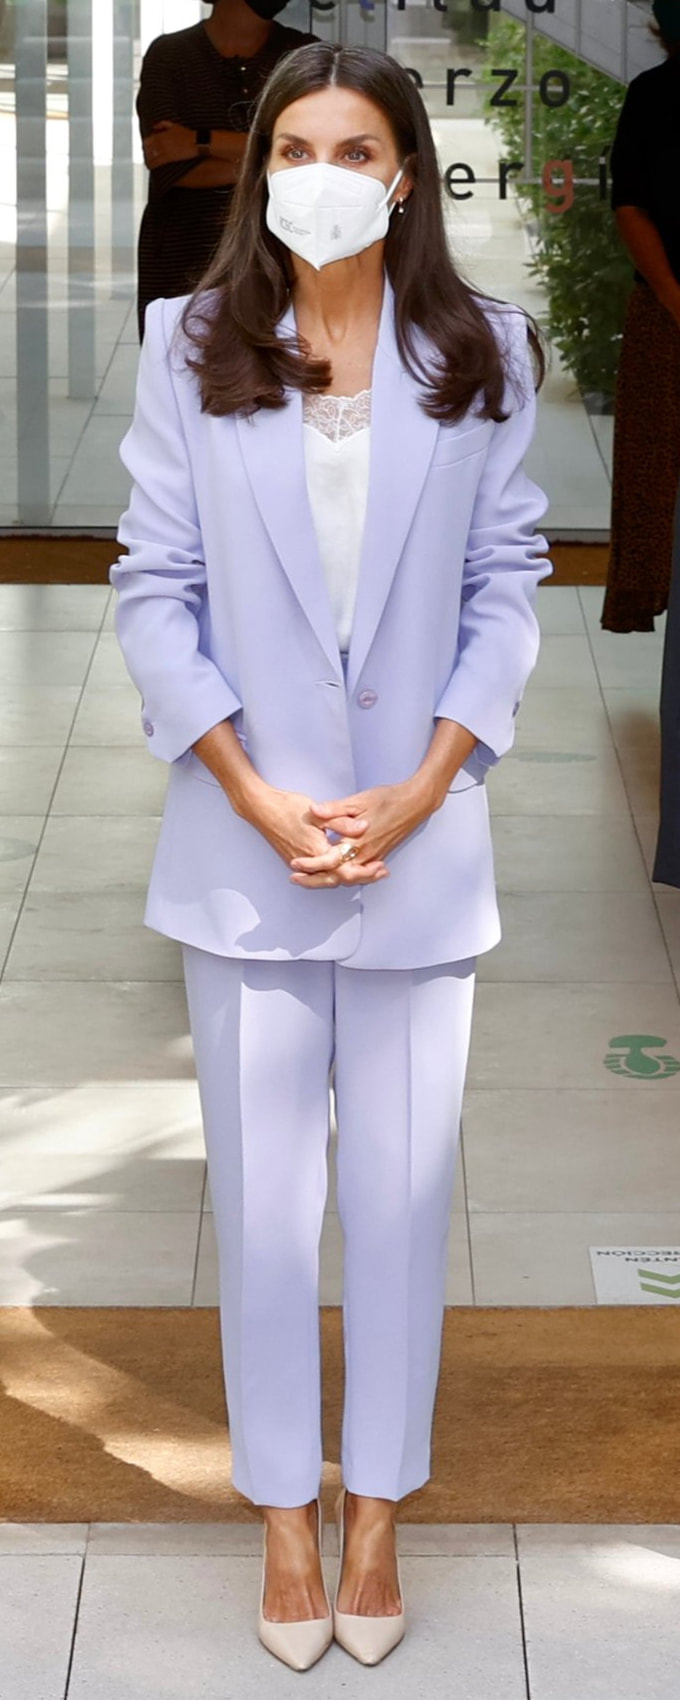 Queen Letizia attends World Cancer Research Day event on 22 September 2021